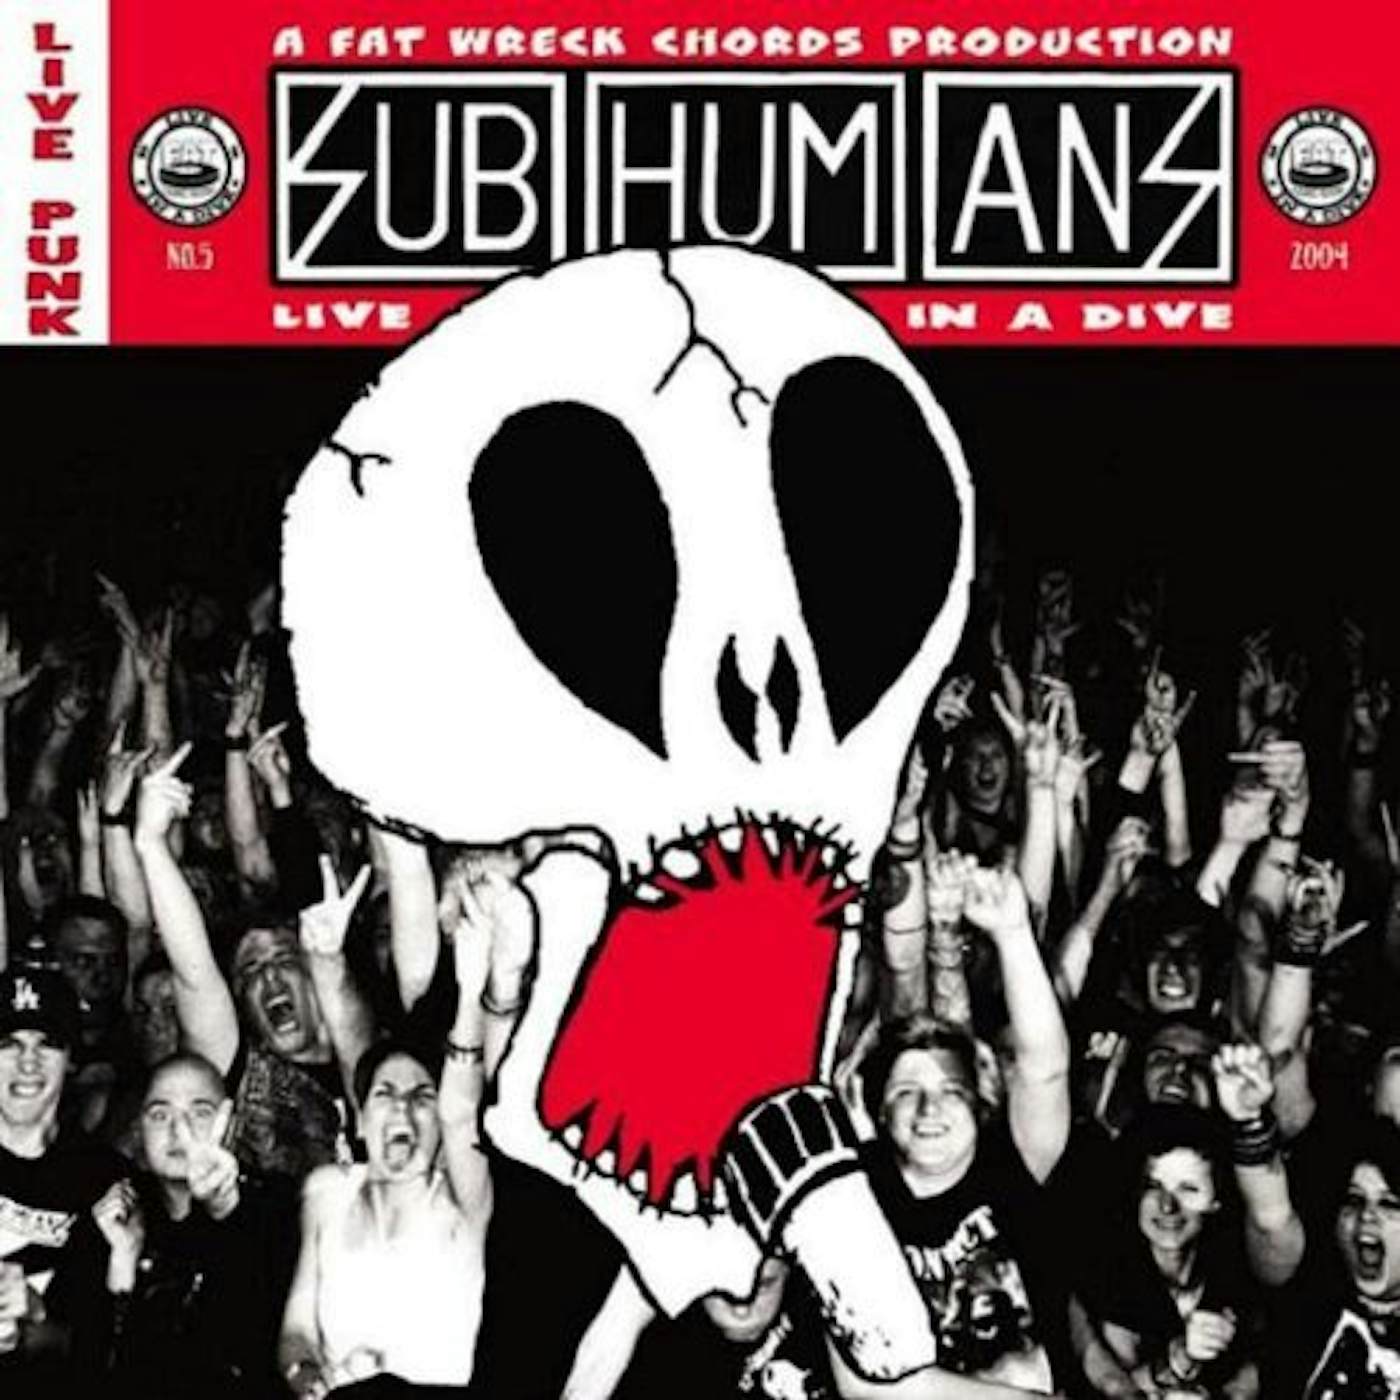 Subhumans LIVE IN A DIVE CD